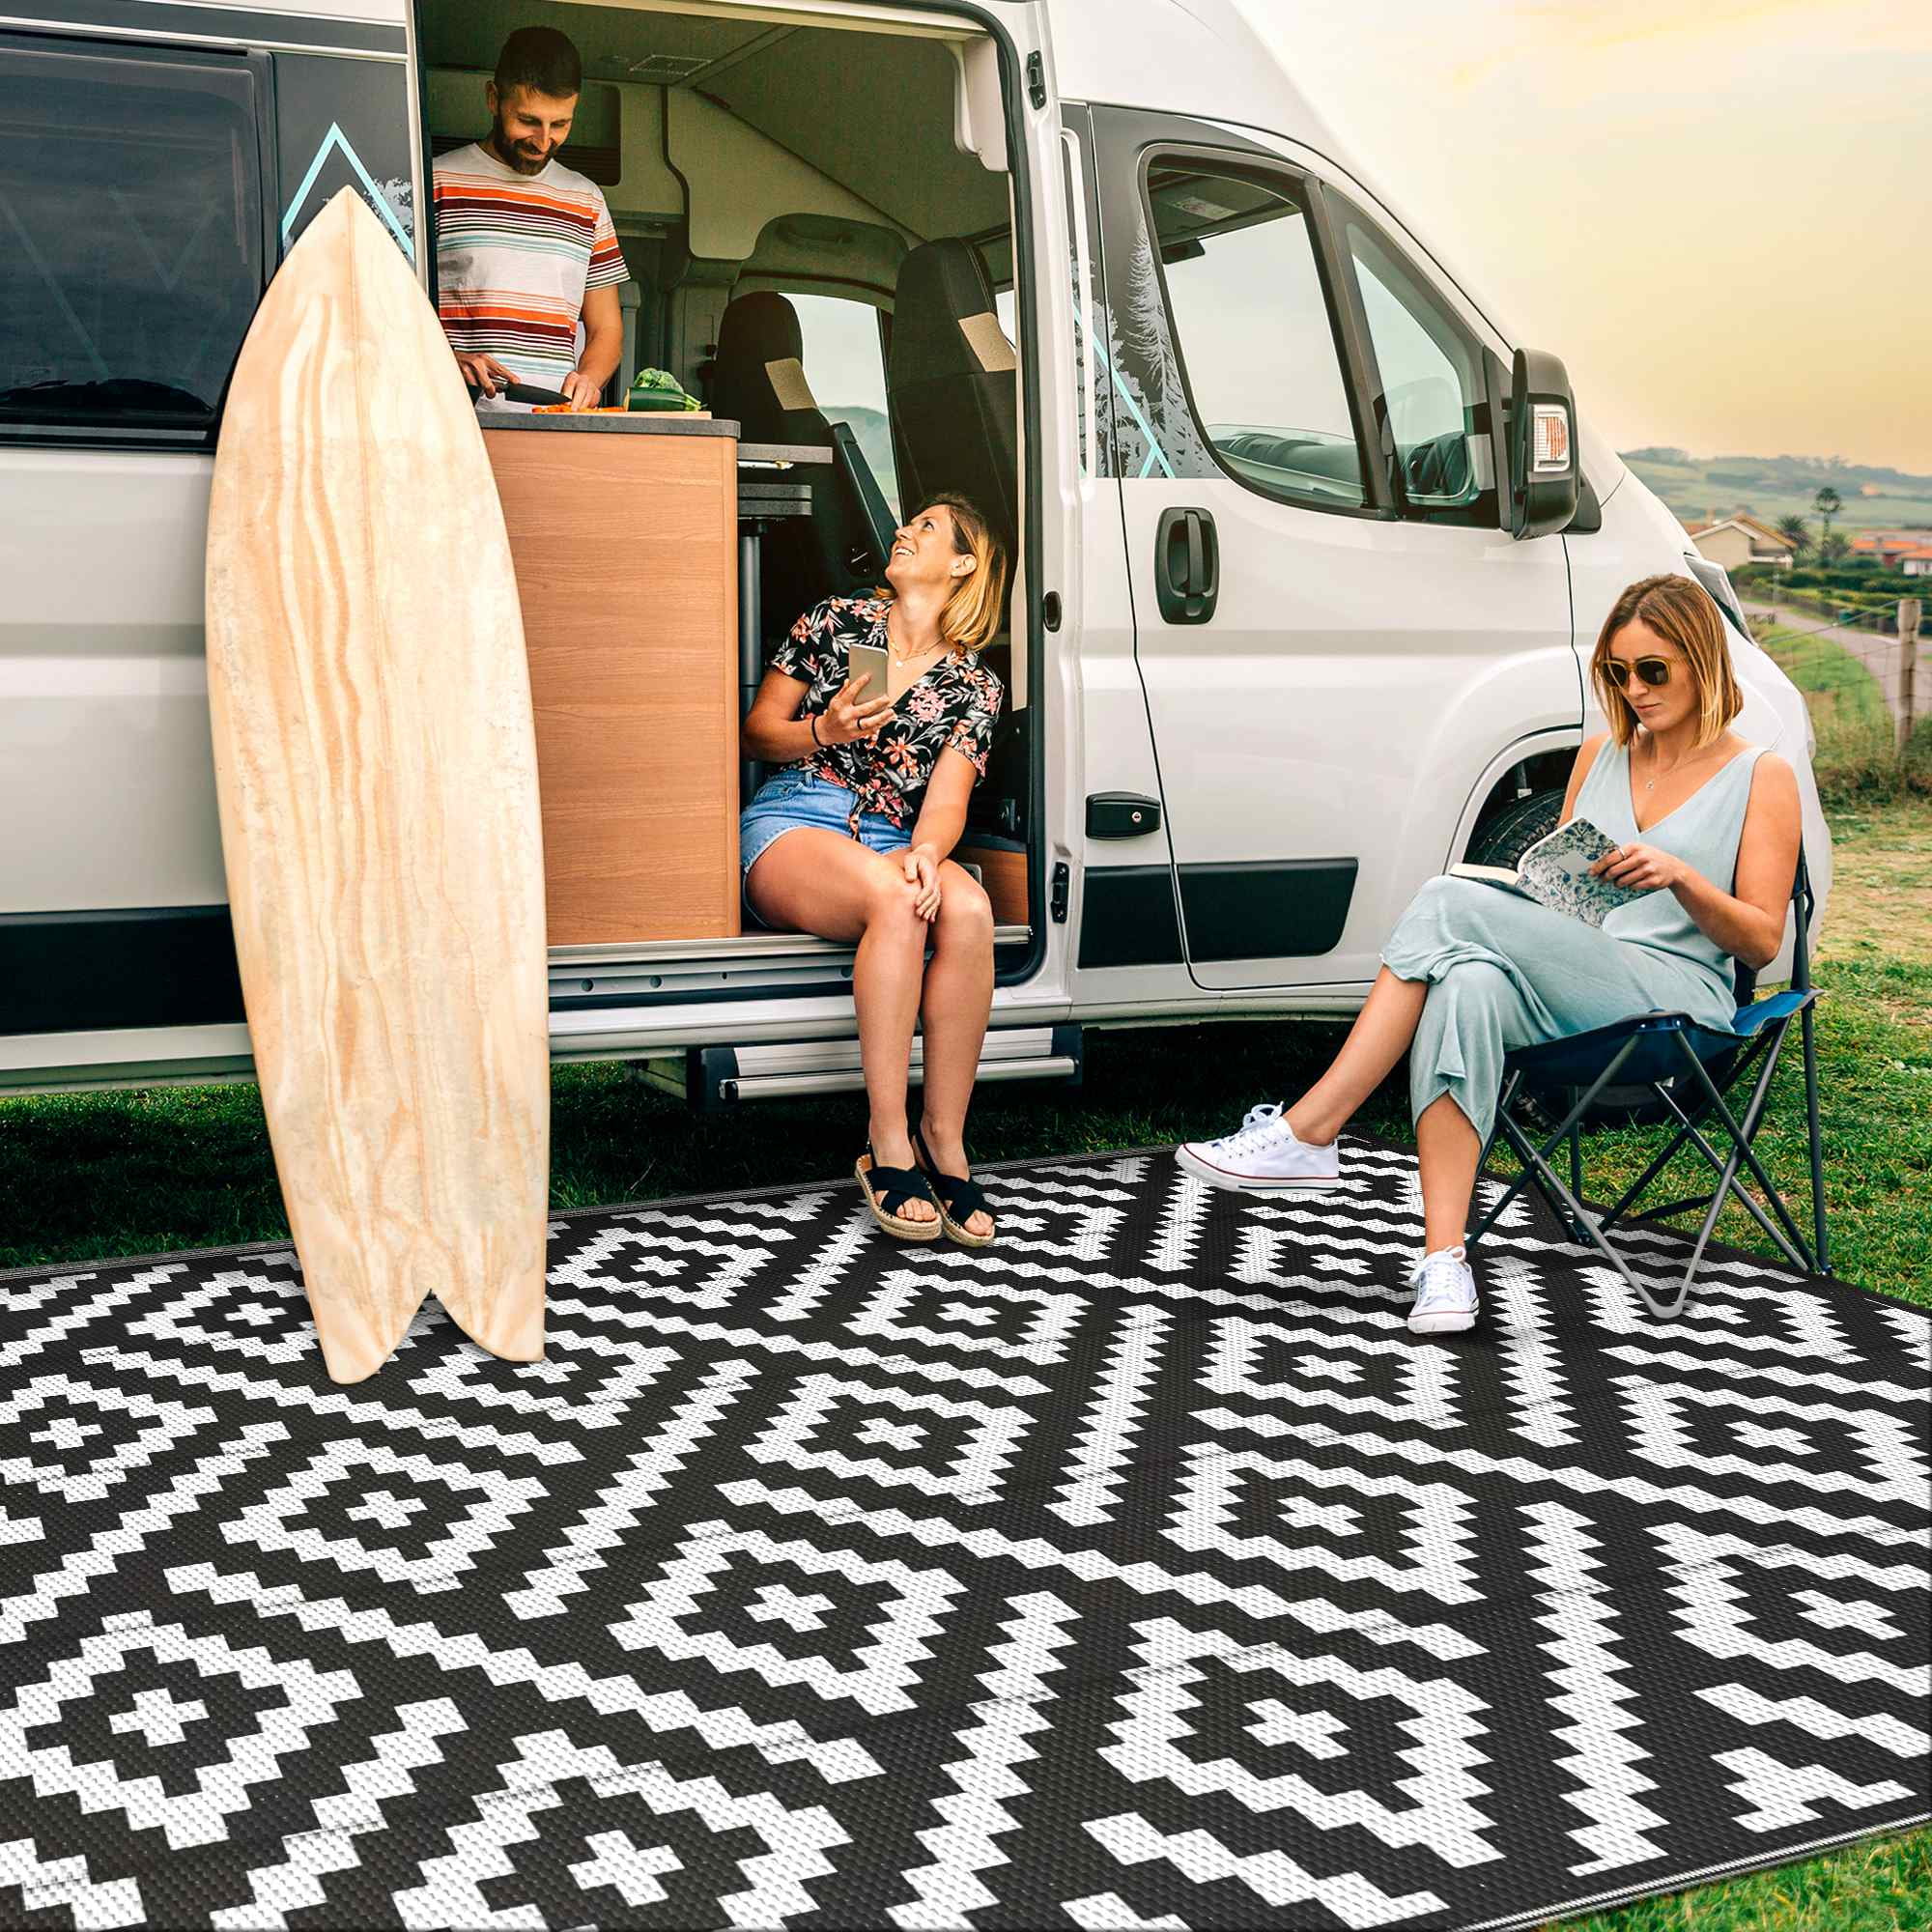 DEORAB 9'x12' Outdoor Rug for Patio Clearance, Reversible Plastic Waterproof  Area , Clearance Mat, Rv, Camping, Black & Gray 